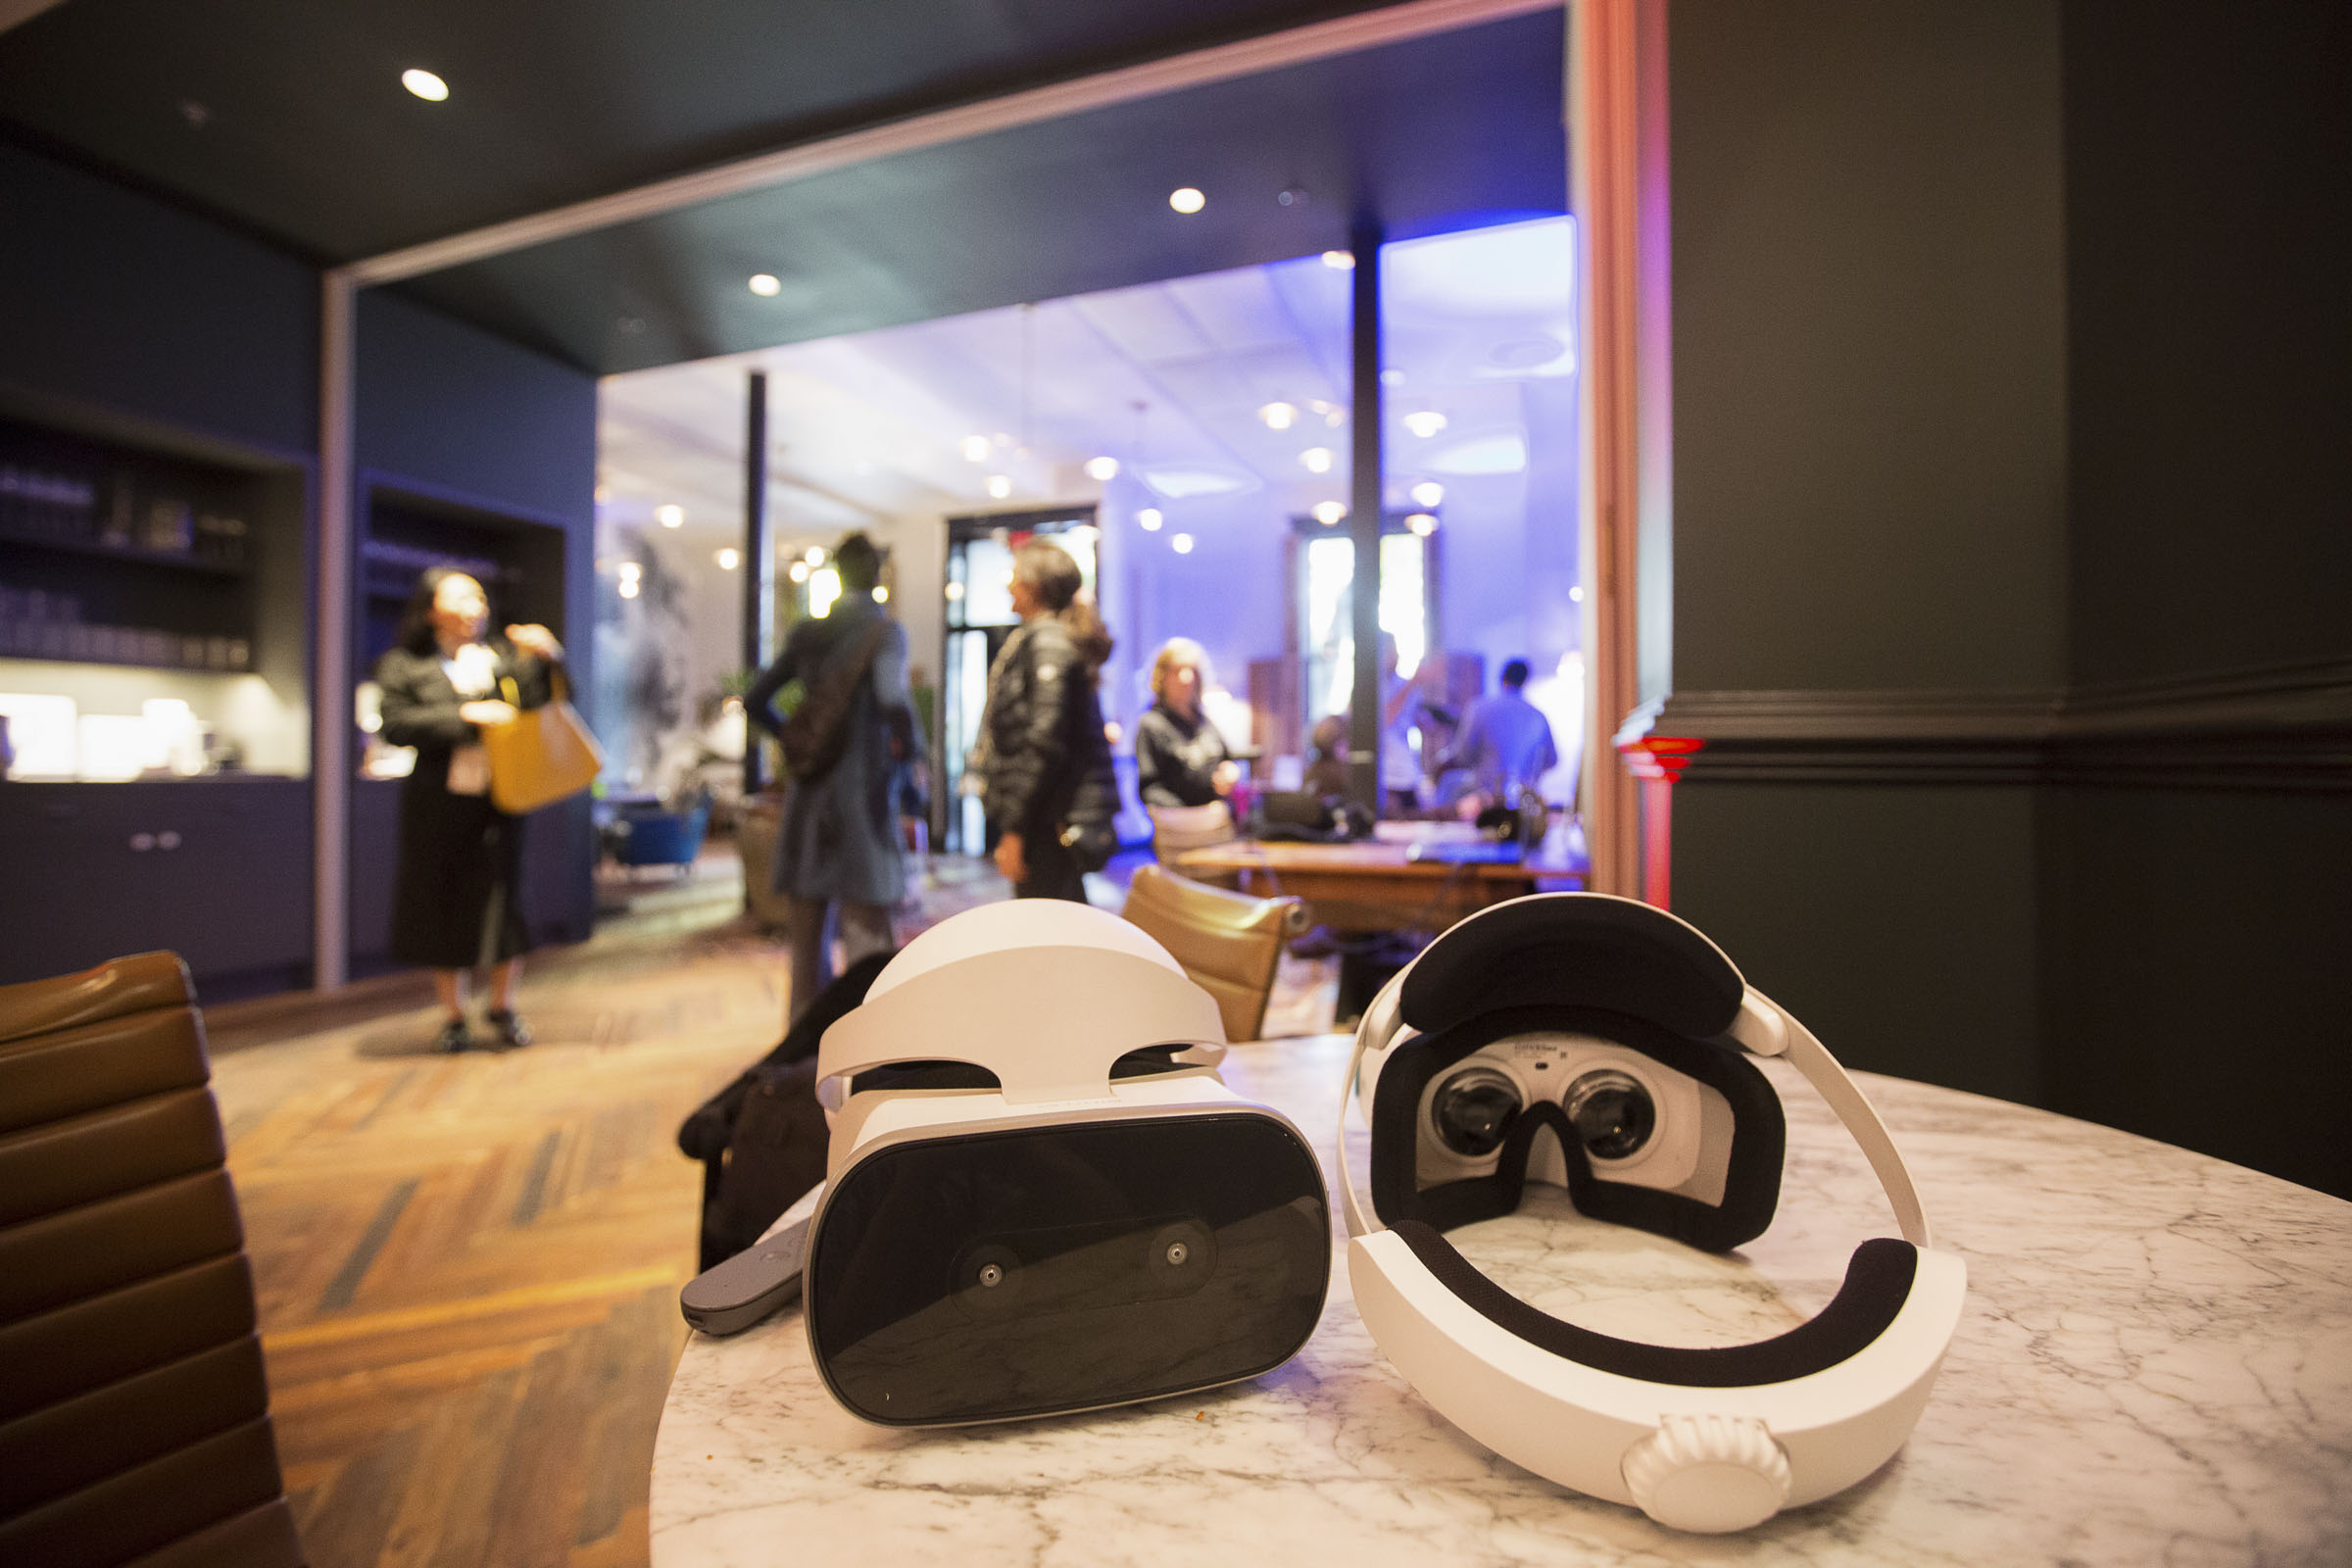 VR headsets sitting on a table